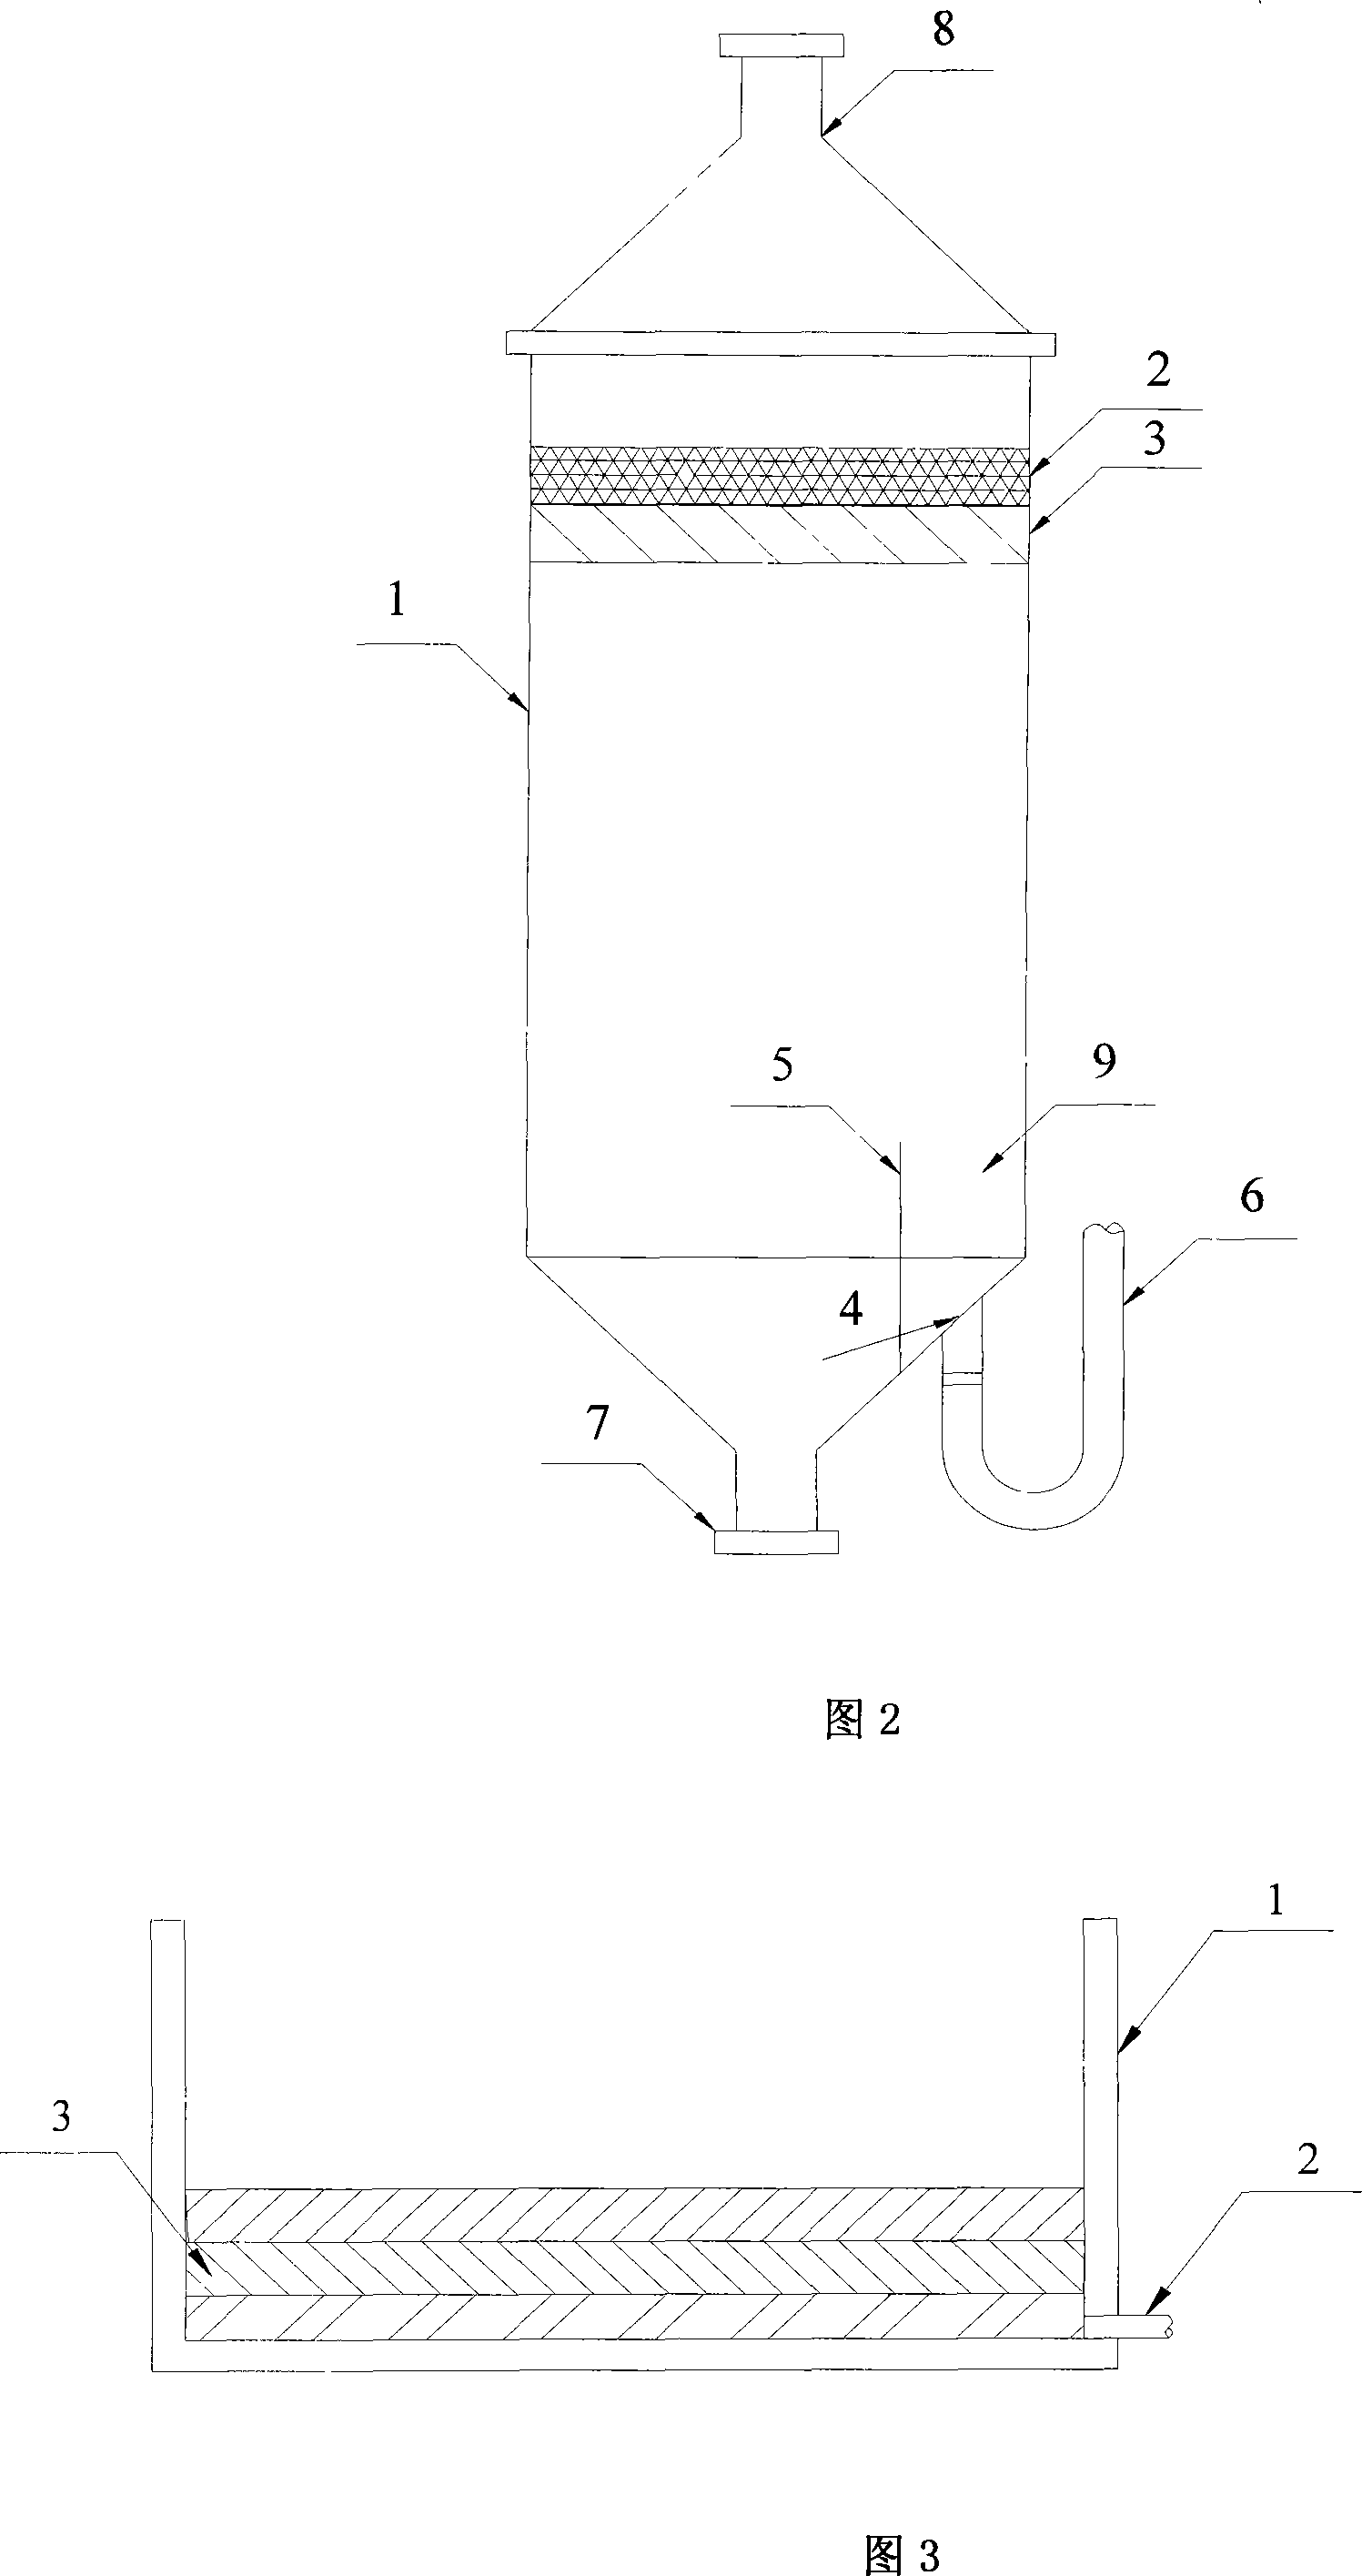 Epoxy ester wastewater recycling treatment method